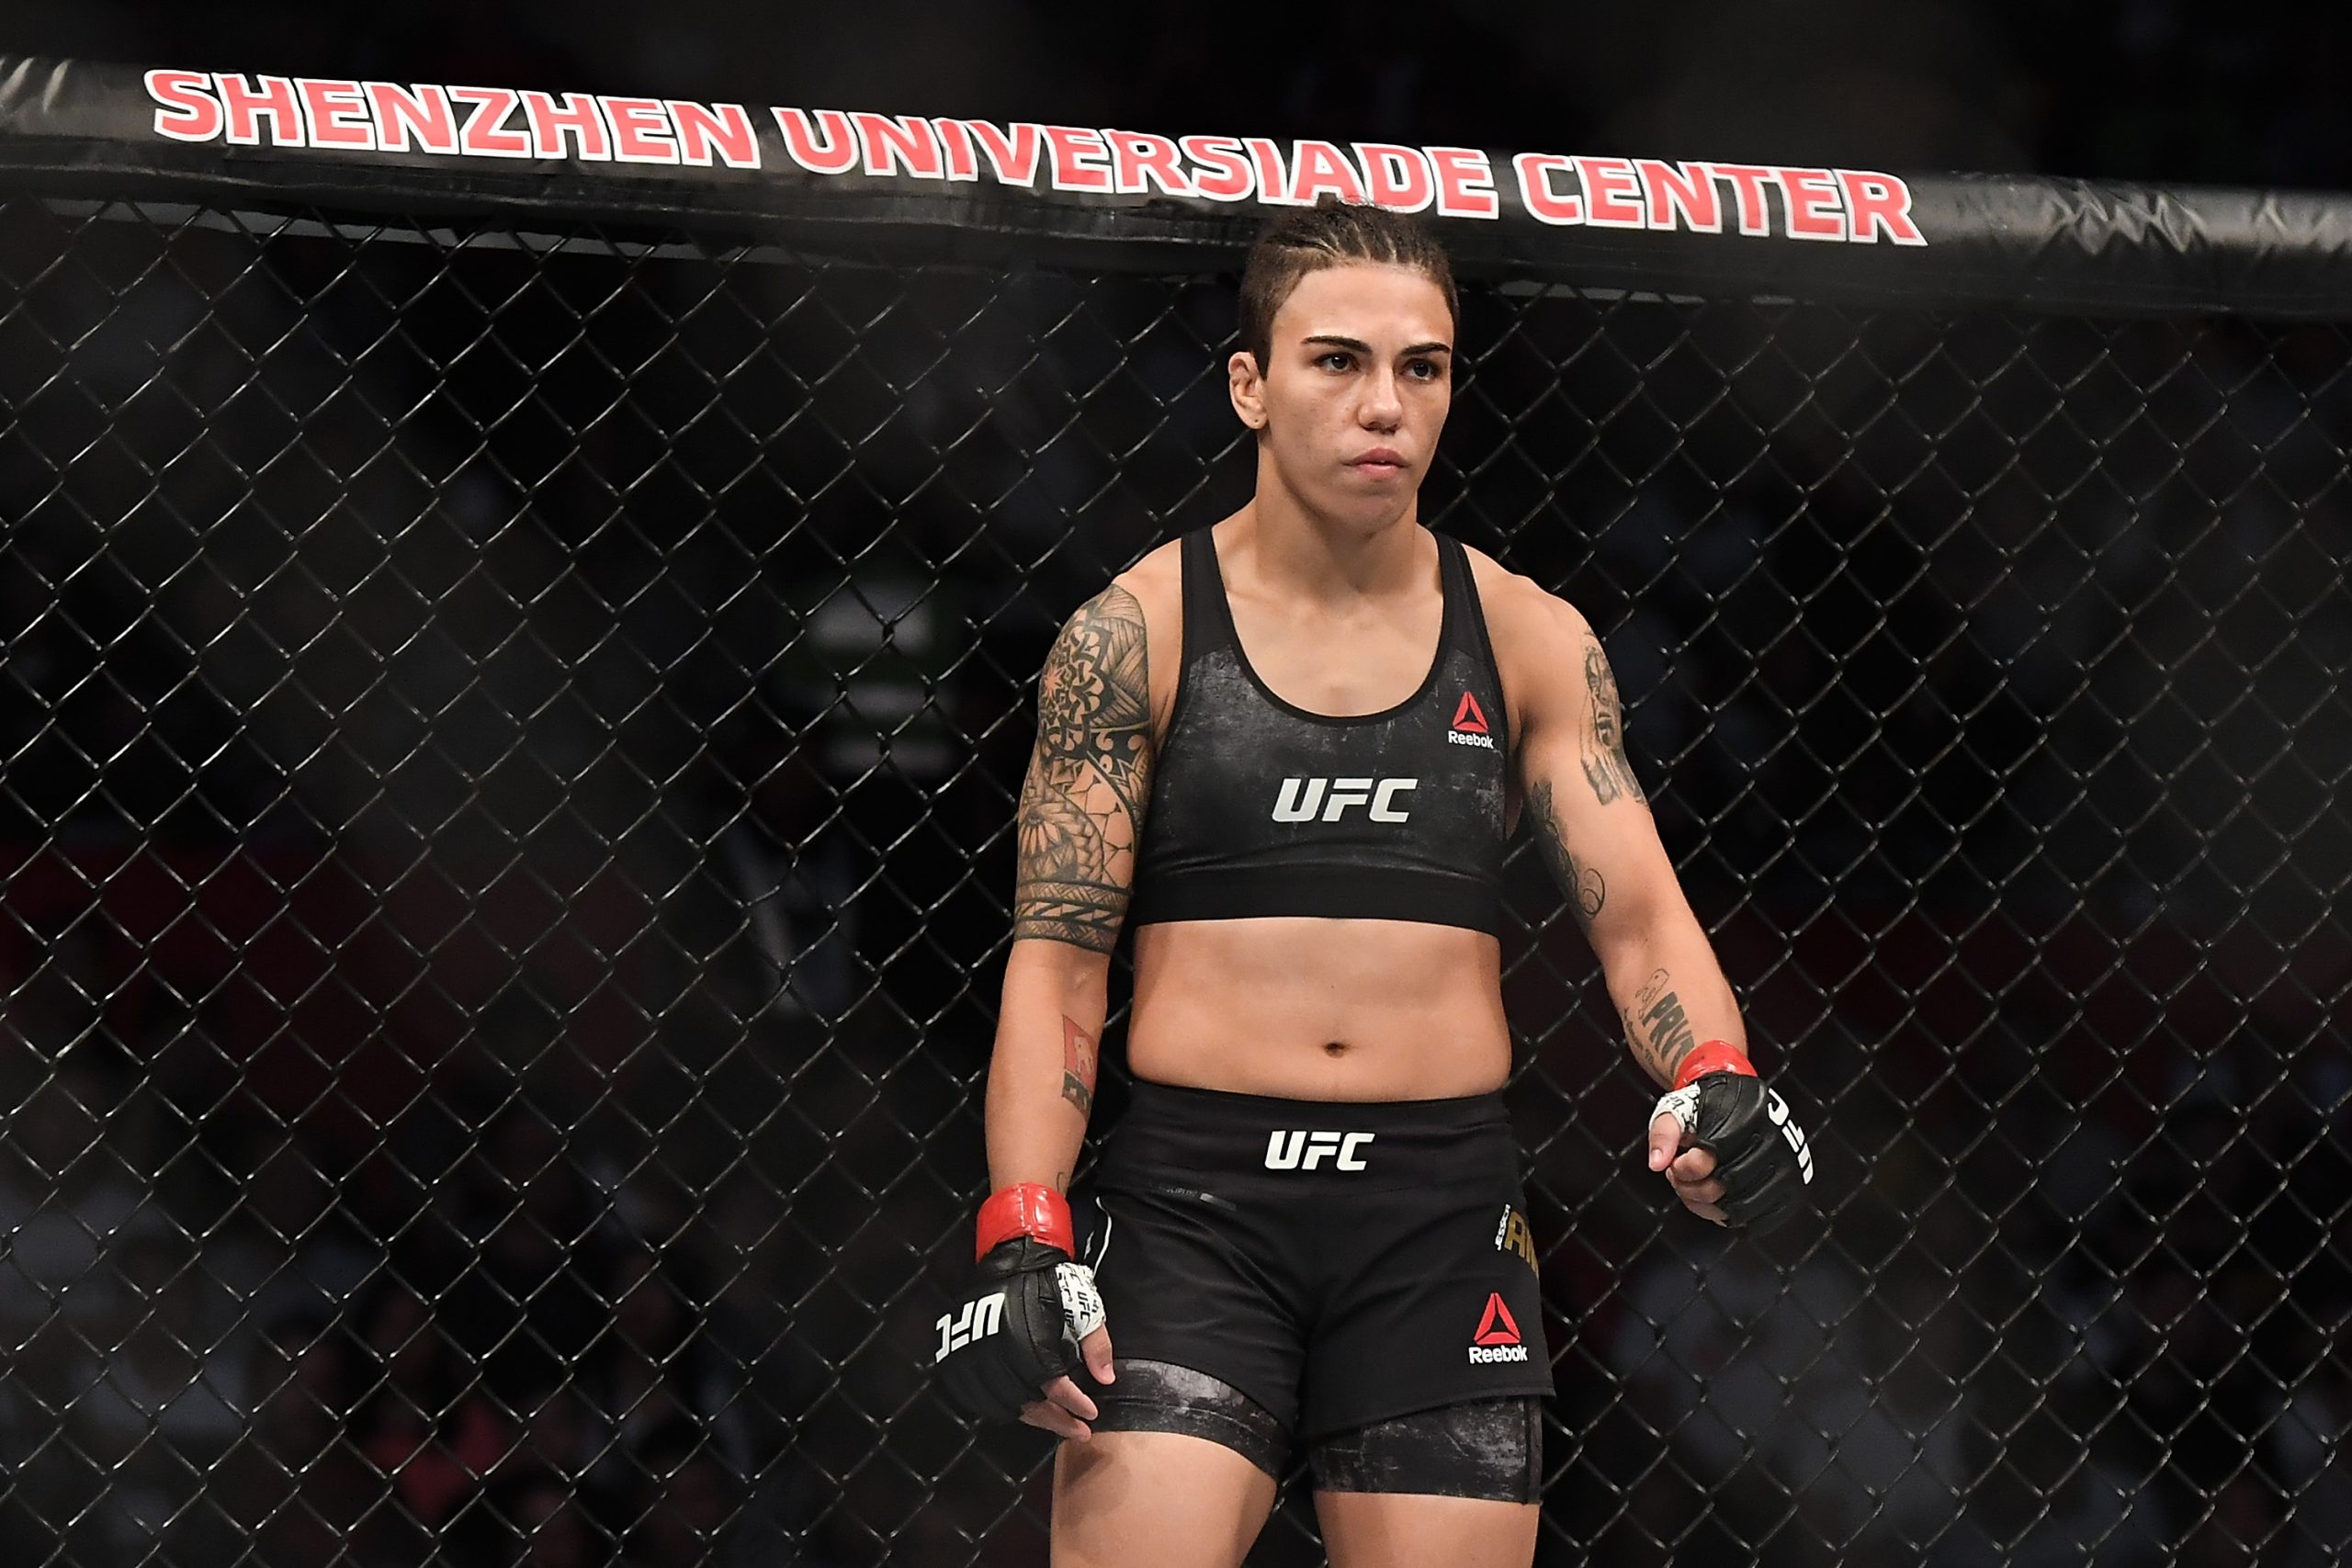 Jessica andrade onlyfan